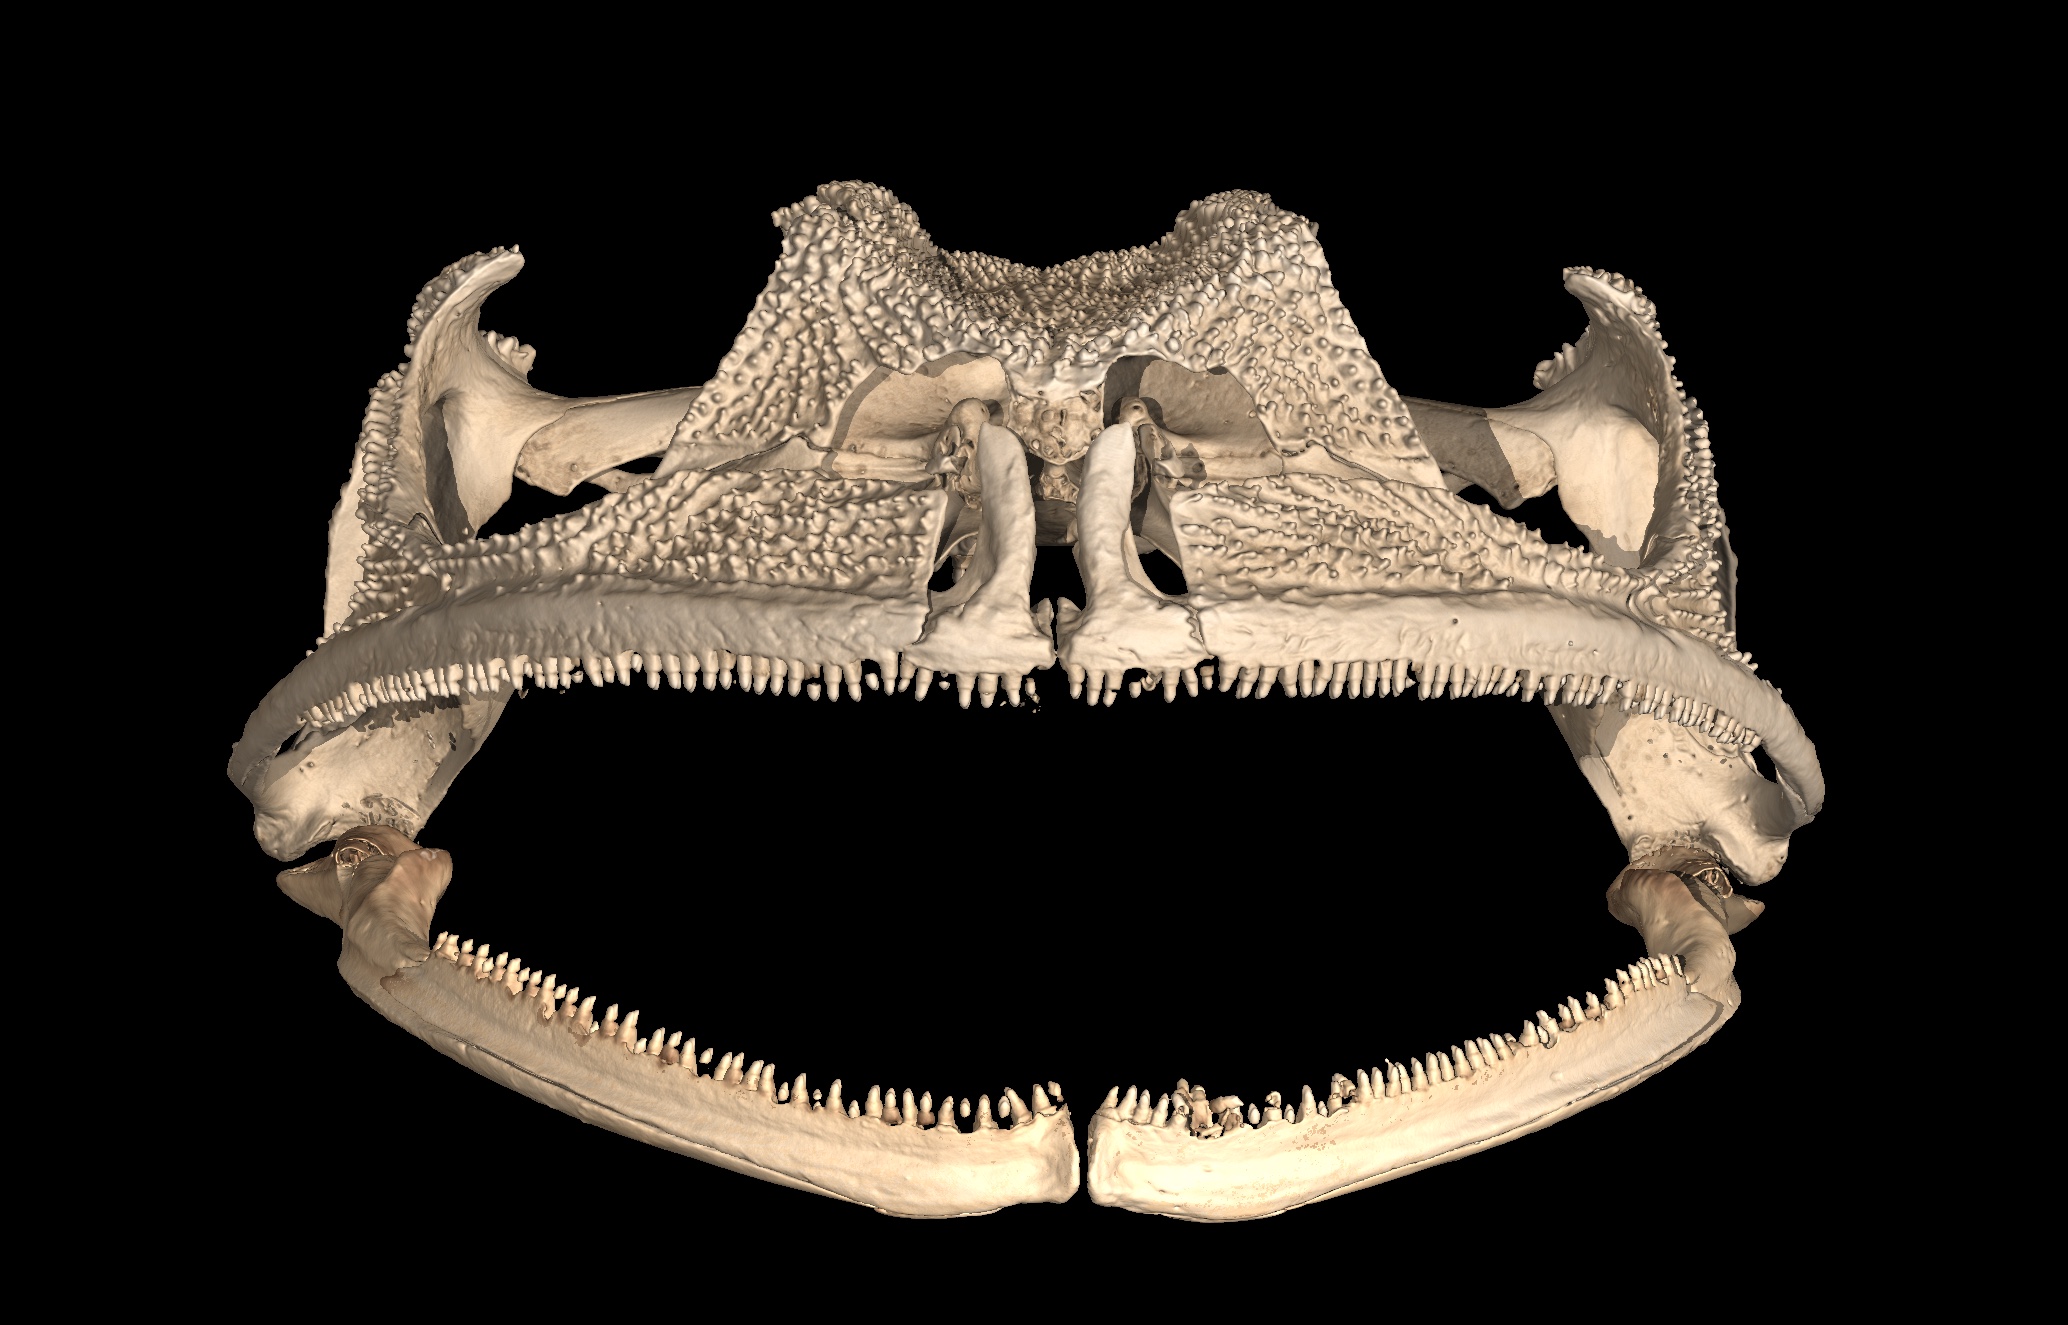 CT scan of Gastrotheca guentheri skull highlighting the teeth on the upper and lower jaws